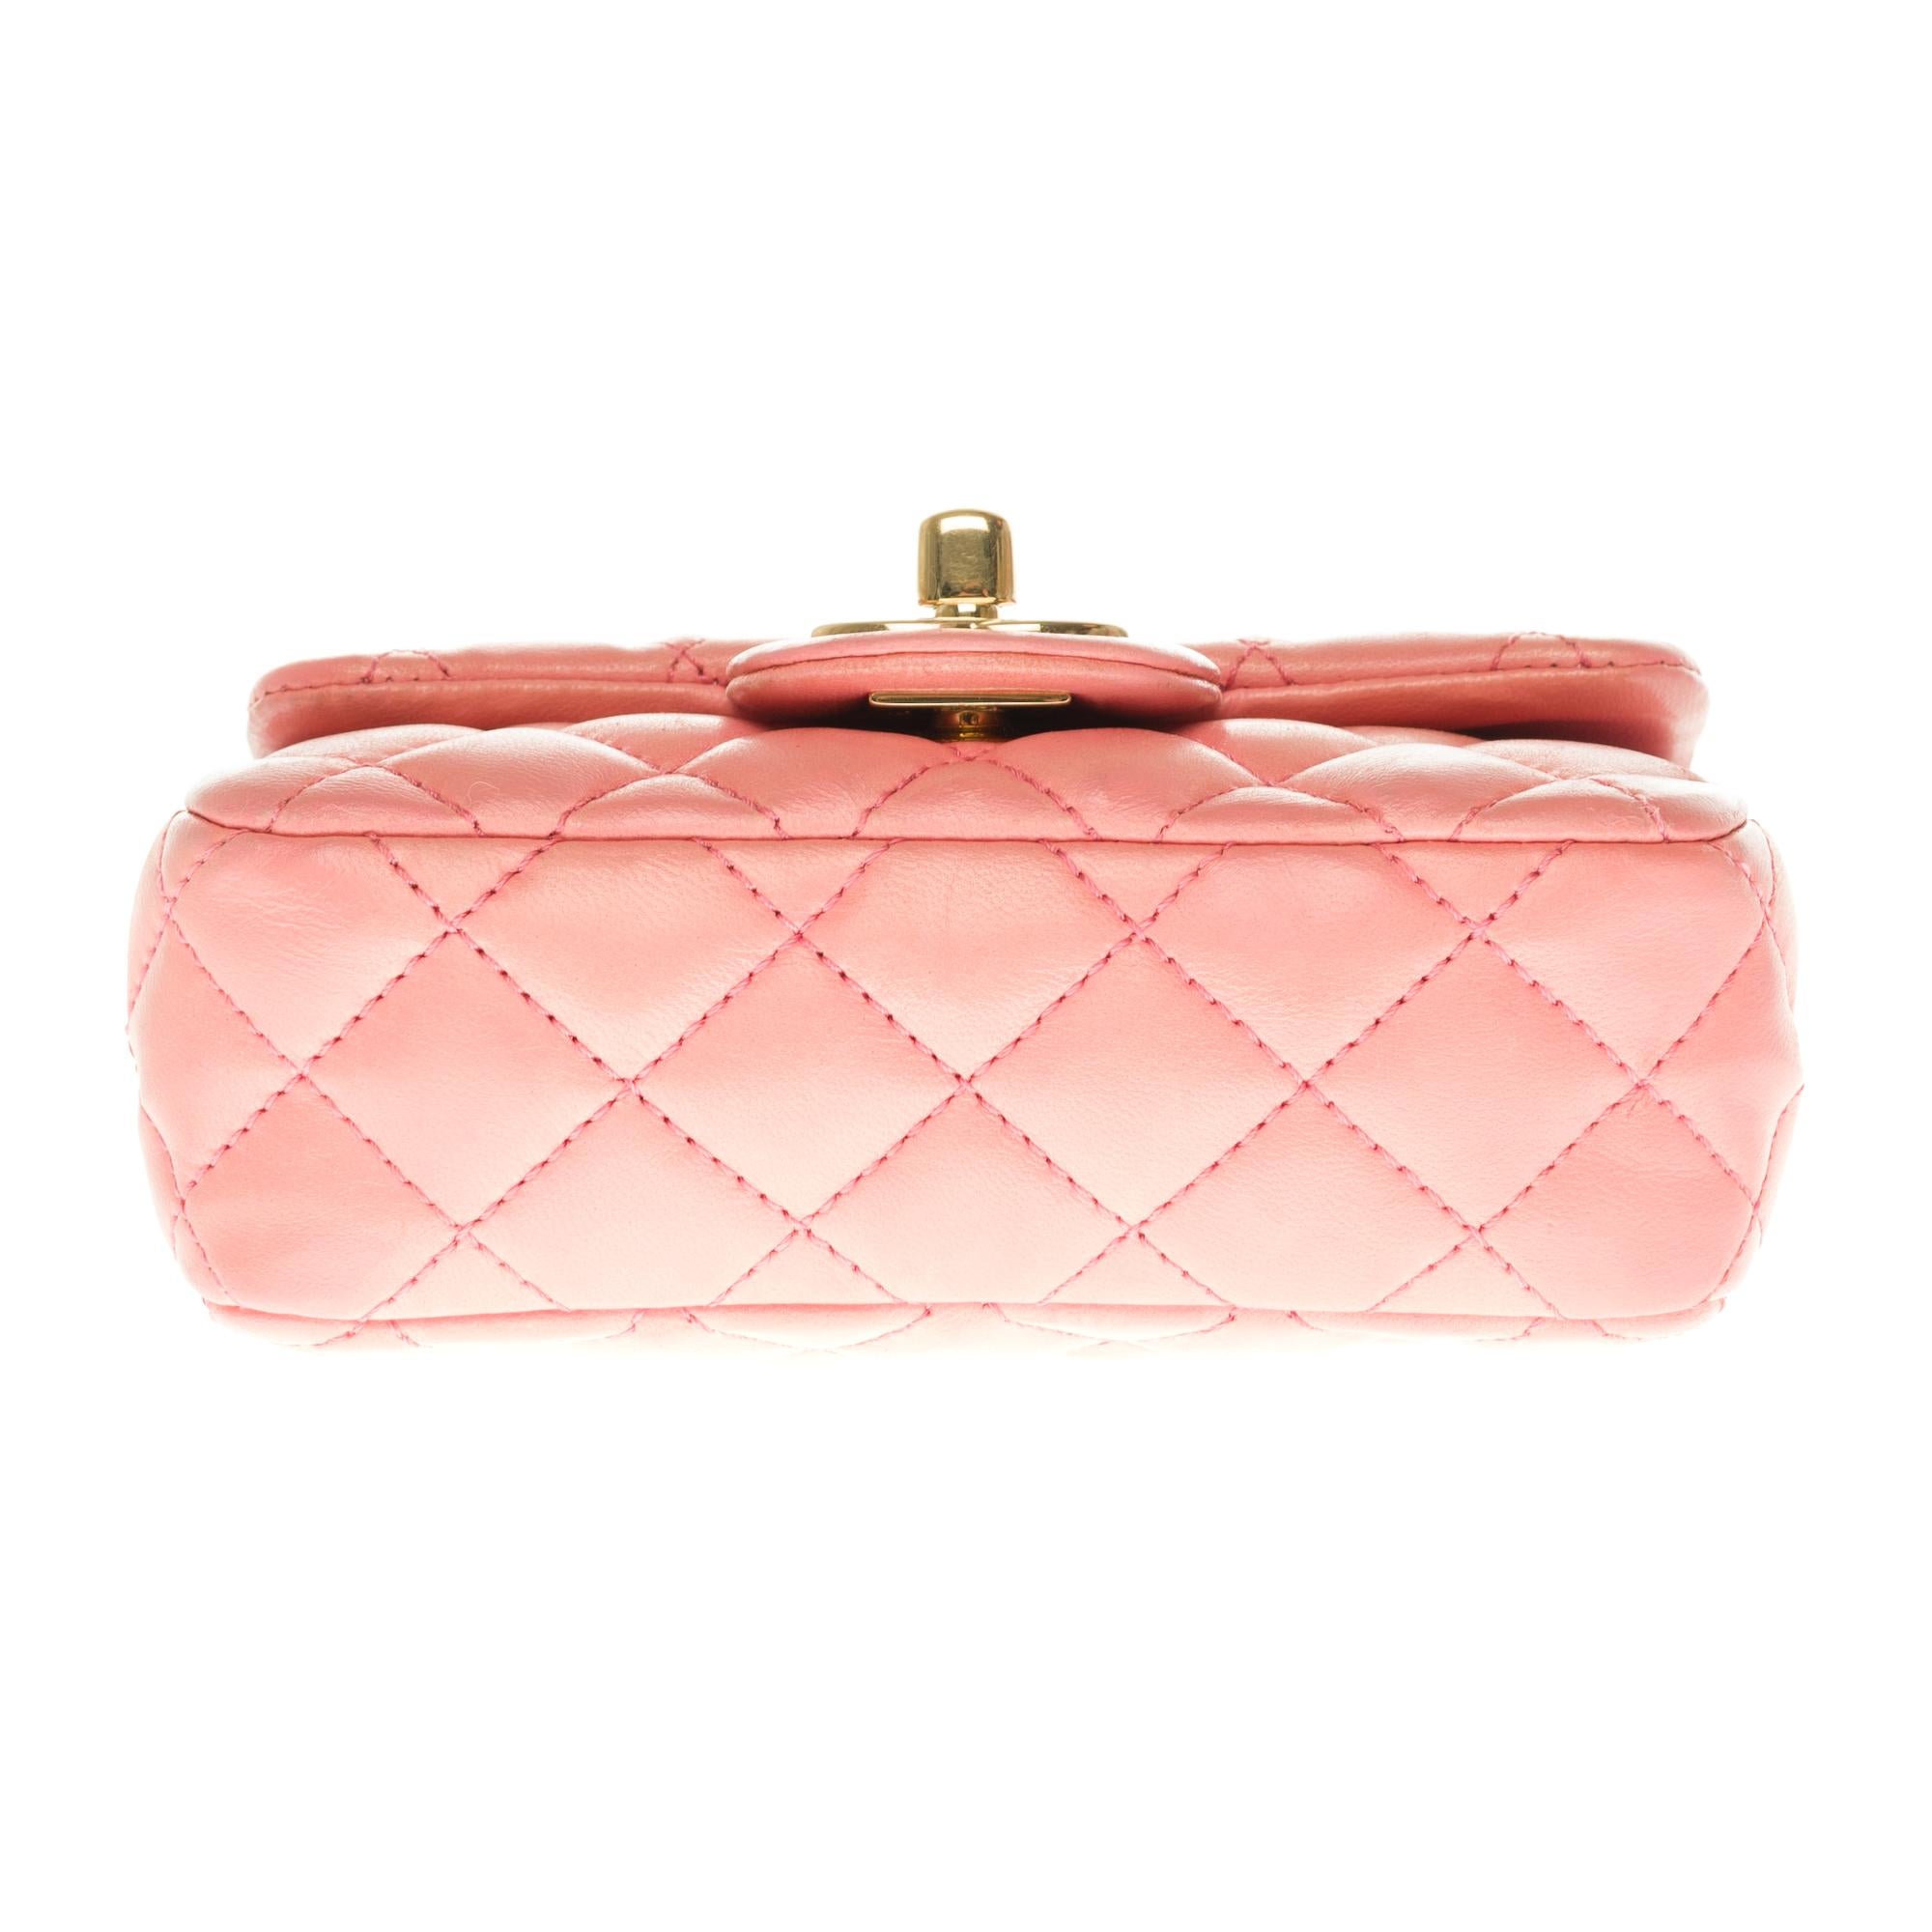 Chanel Mini Charms Shoulder bag in Pink quilted leather and gold hardware 3